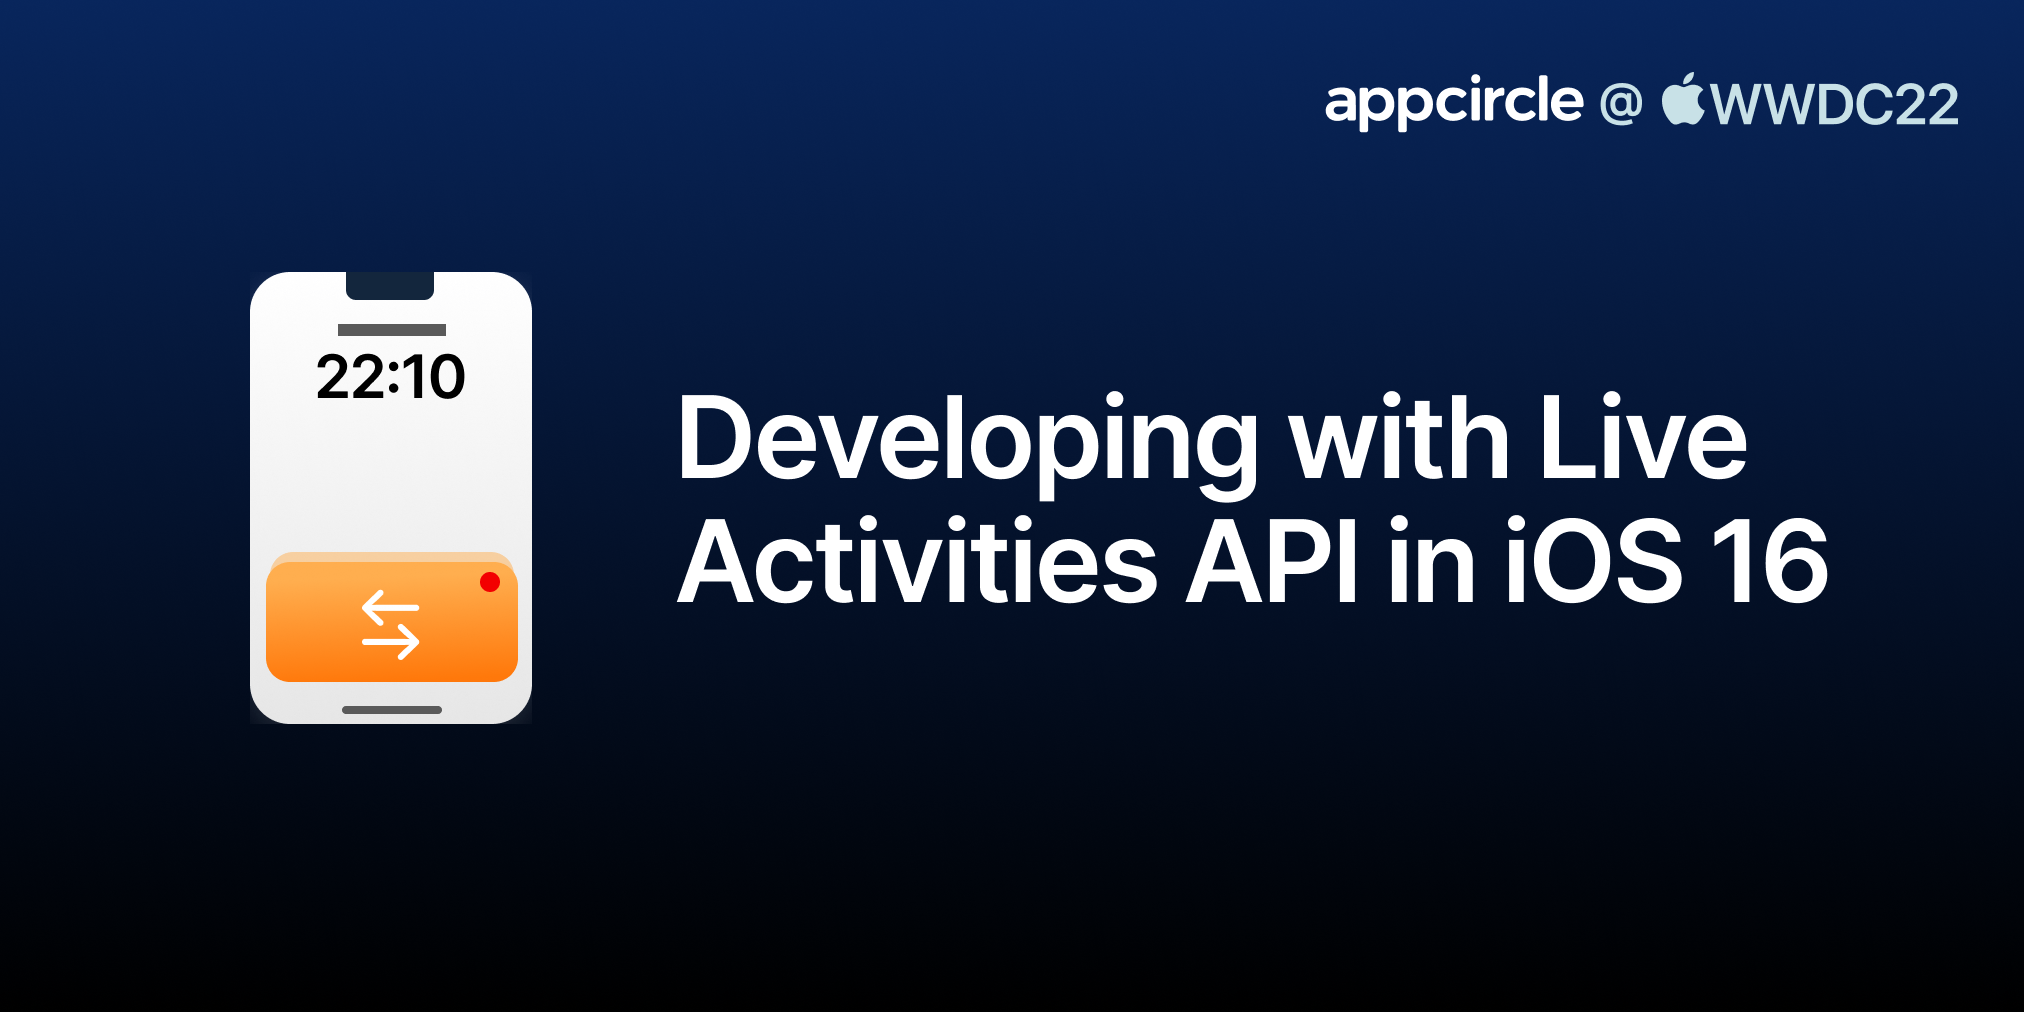 Developing with Live Activities API in iOS 16